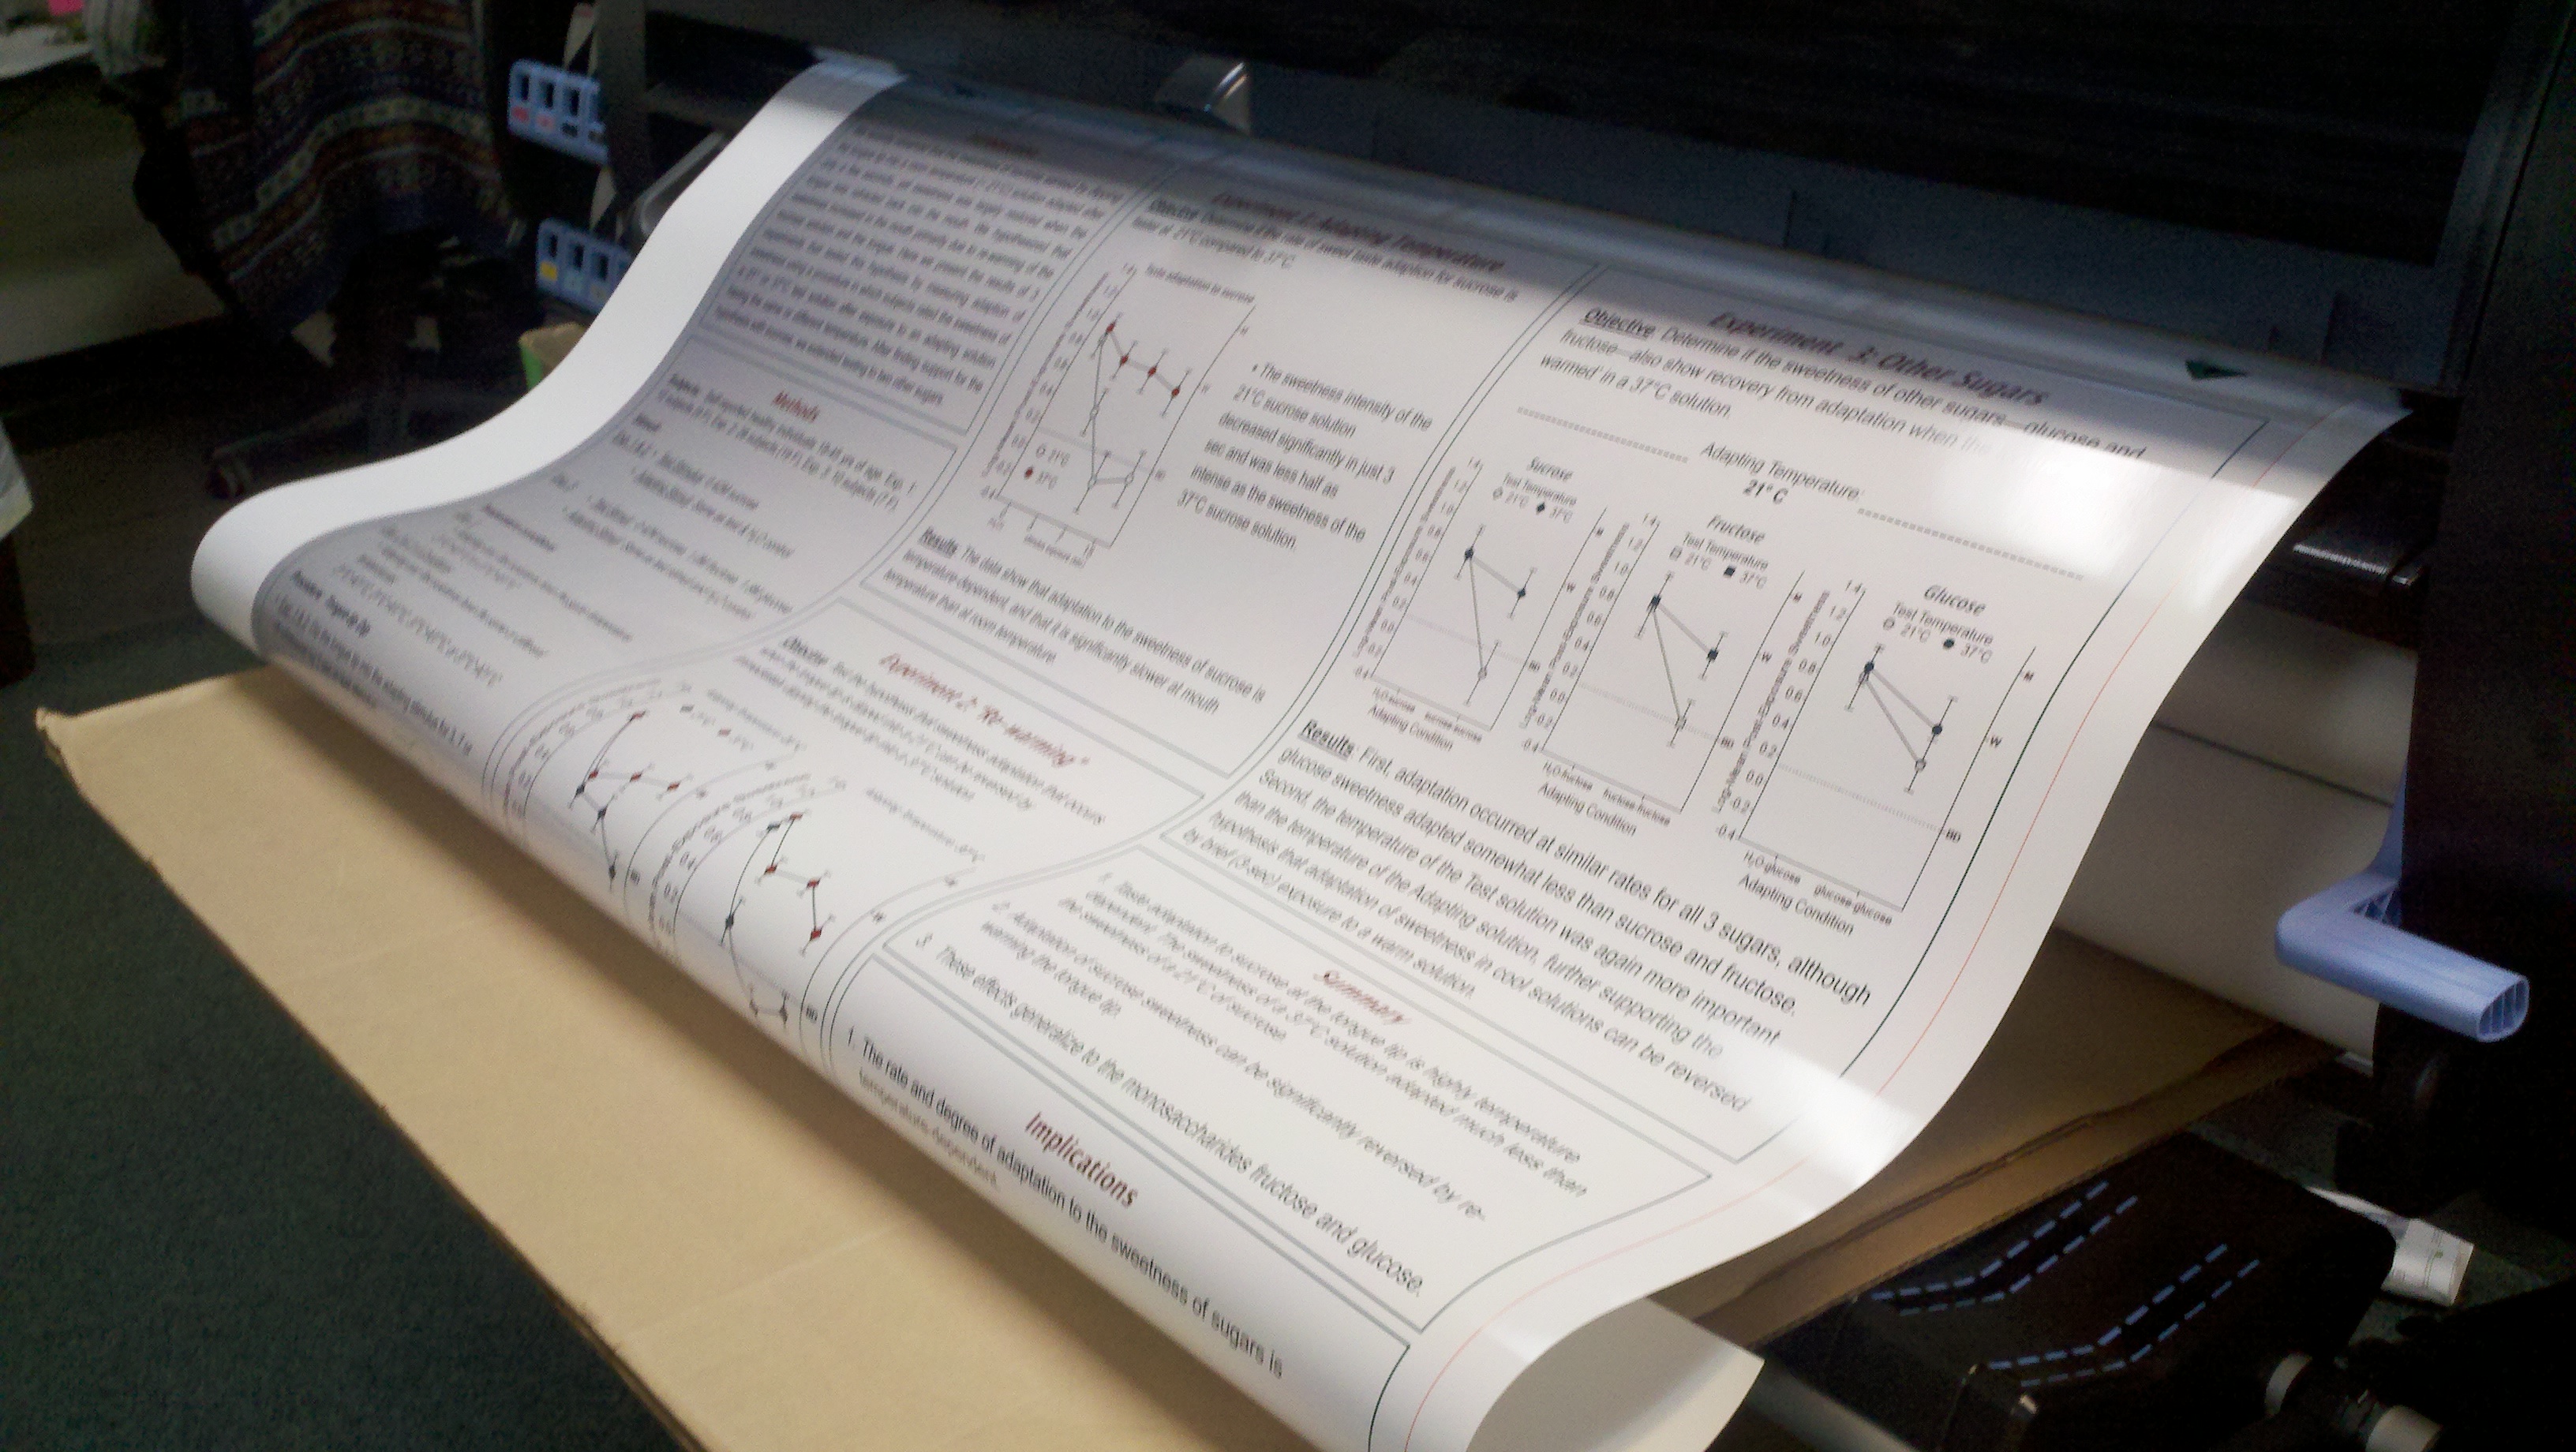 Where can i buy scientific research poster paper?